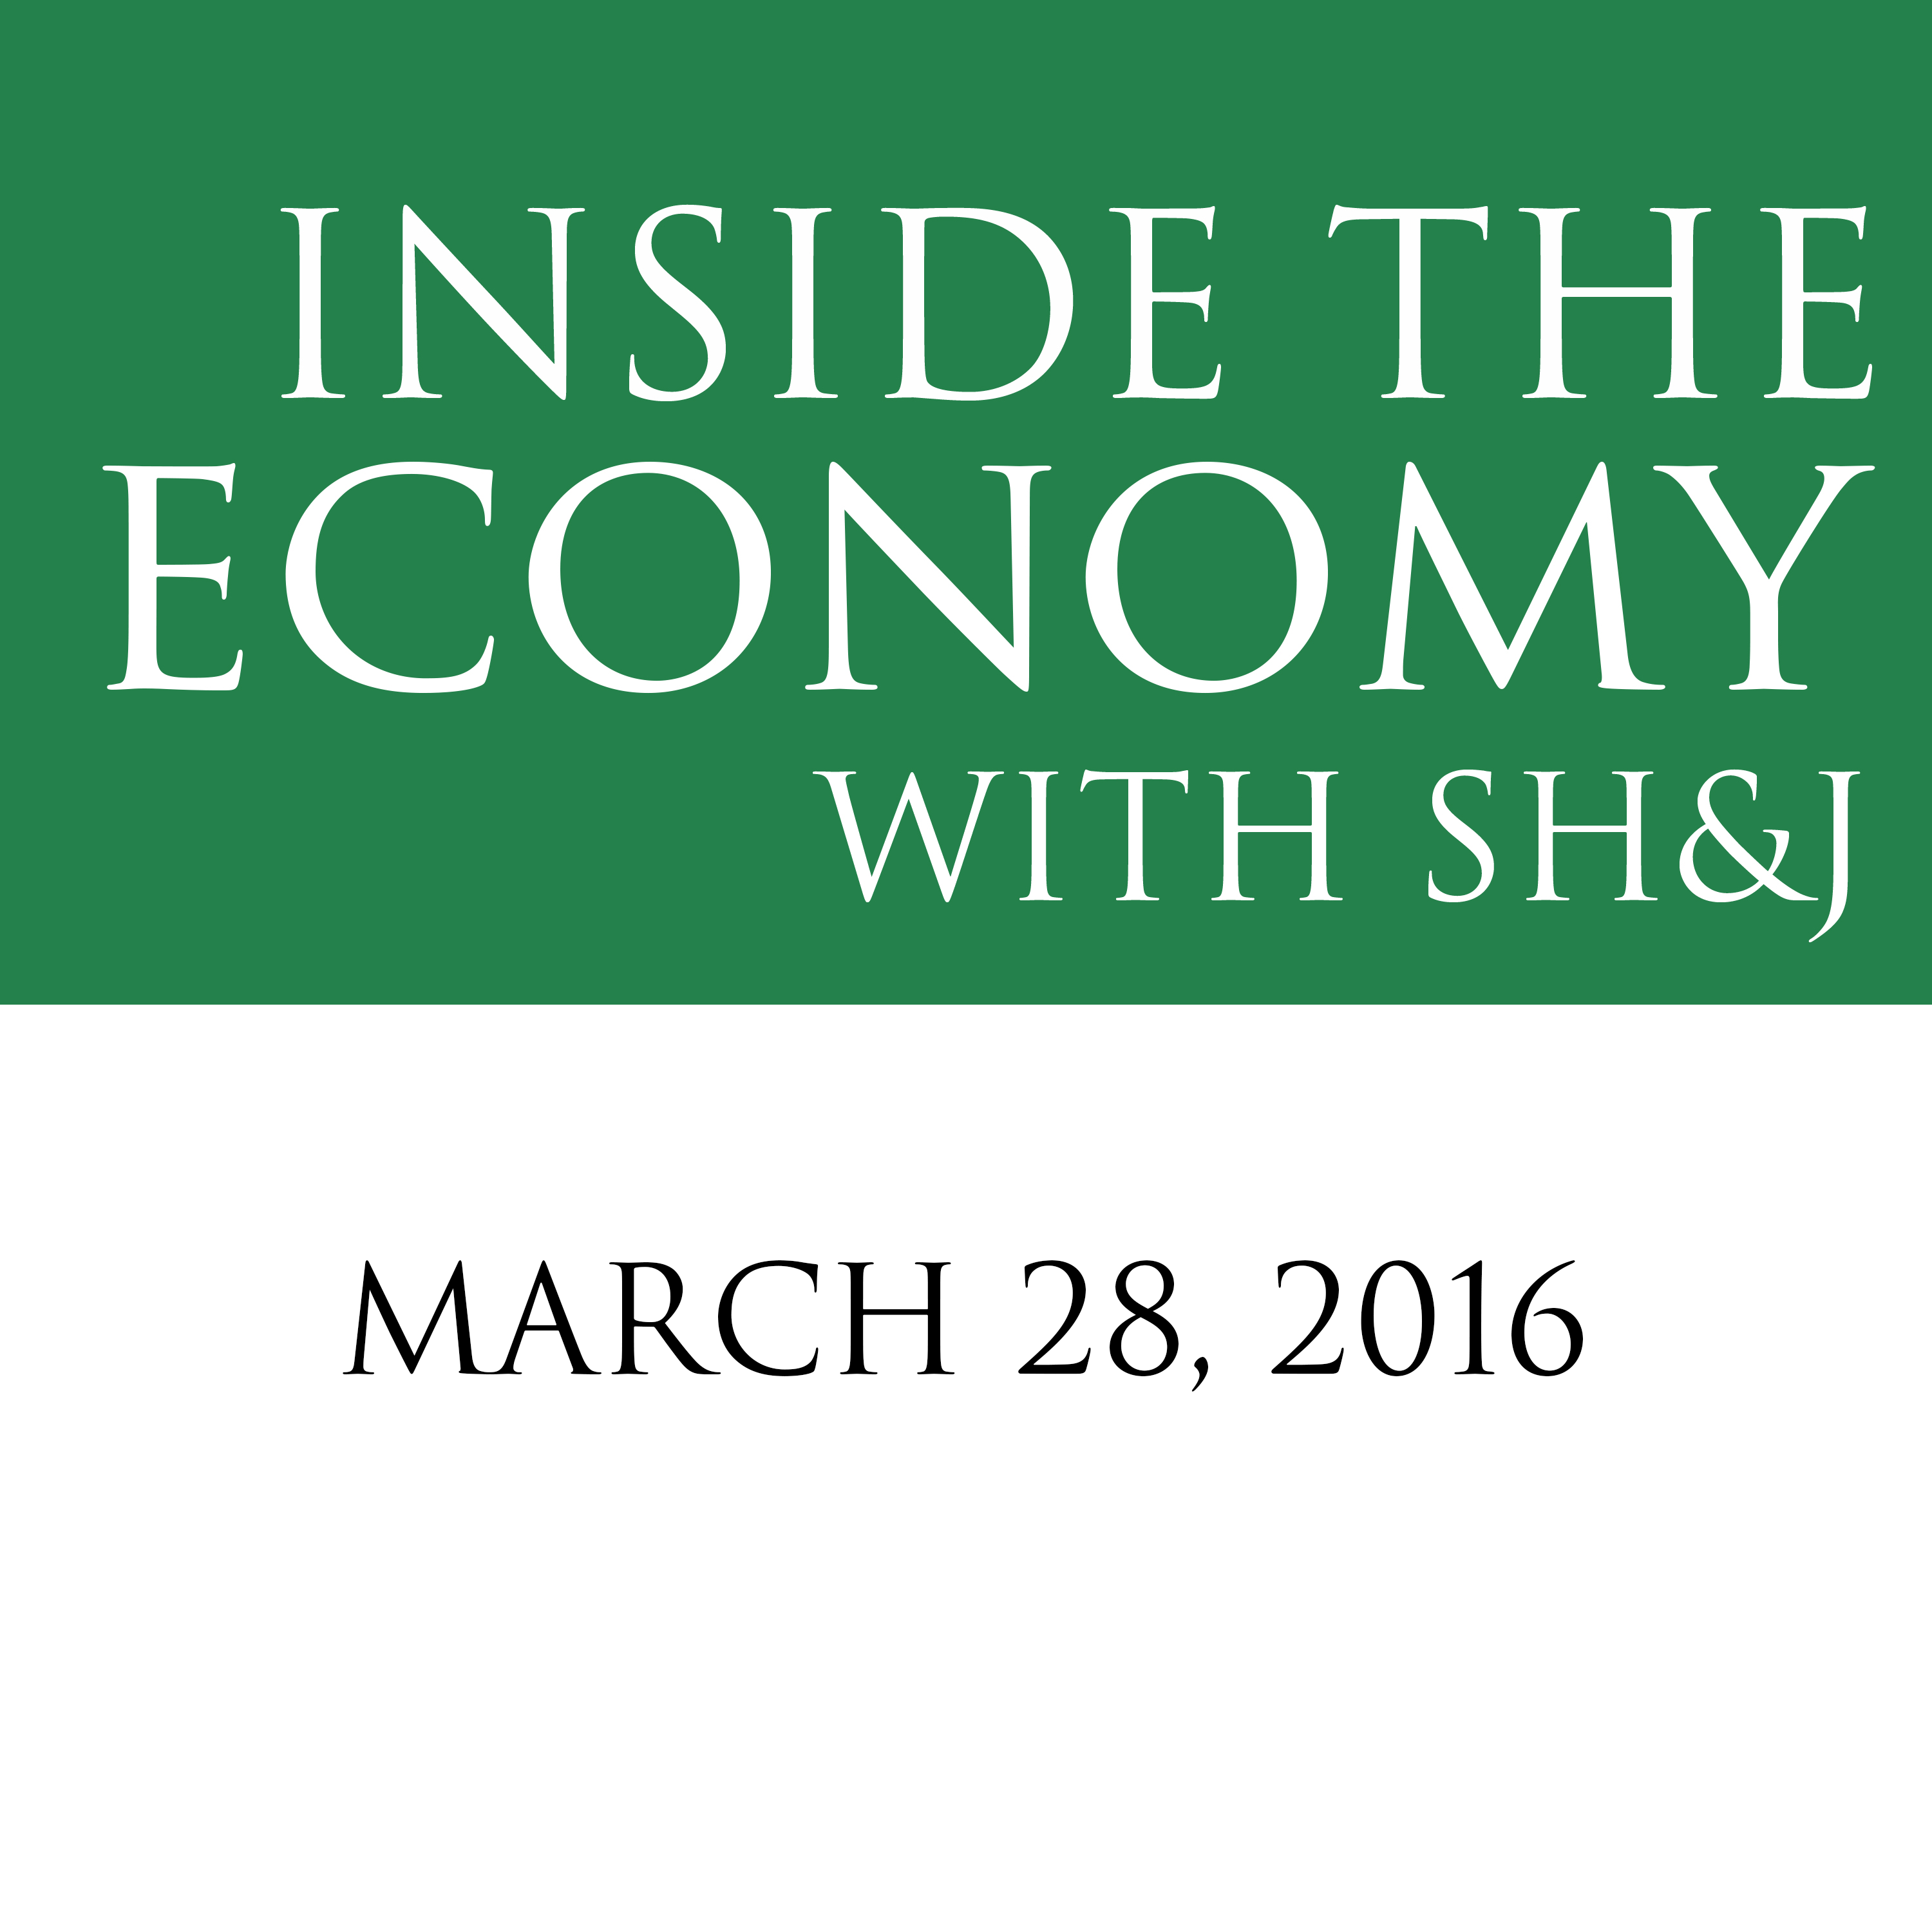 March 28, 2016  --  Inside the Economy with SH&J